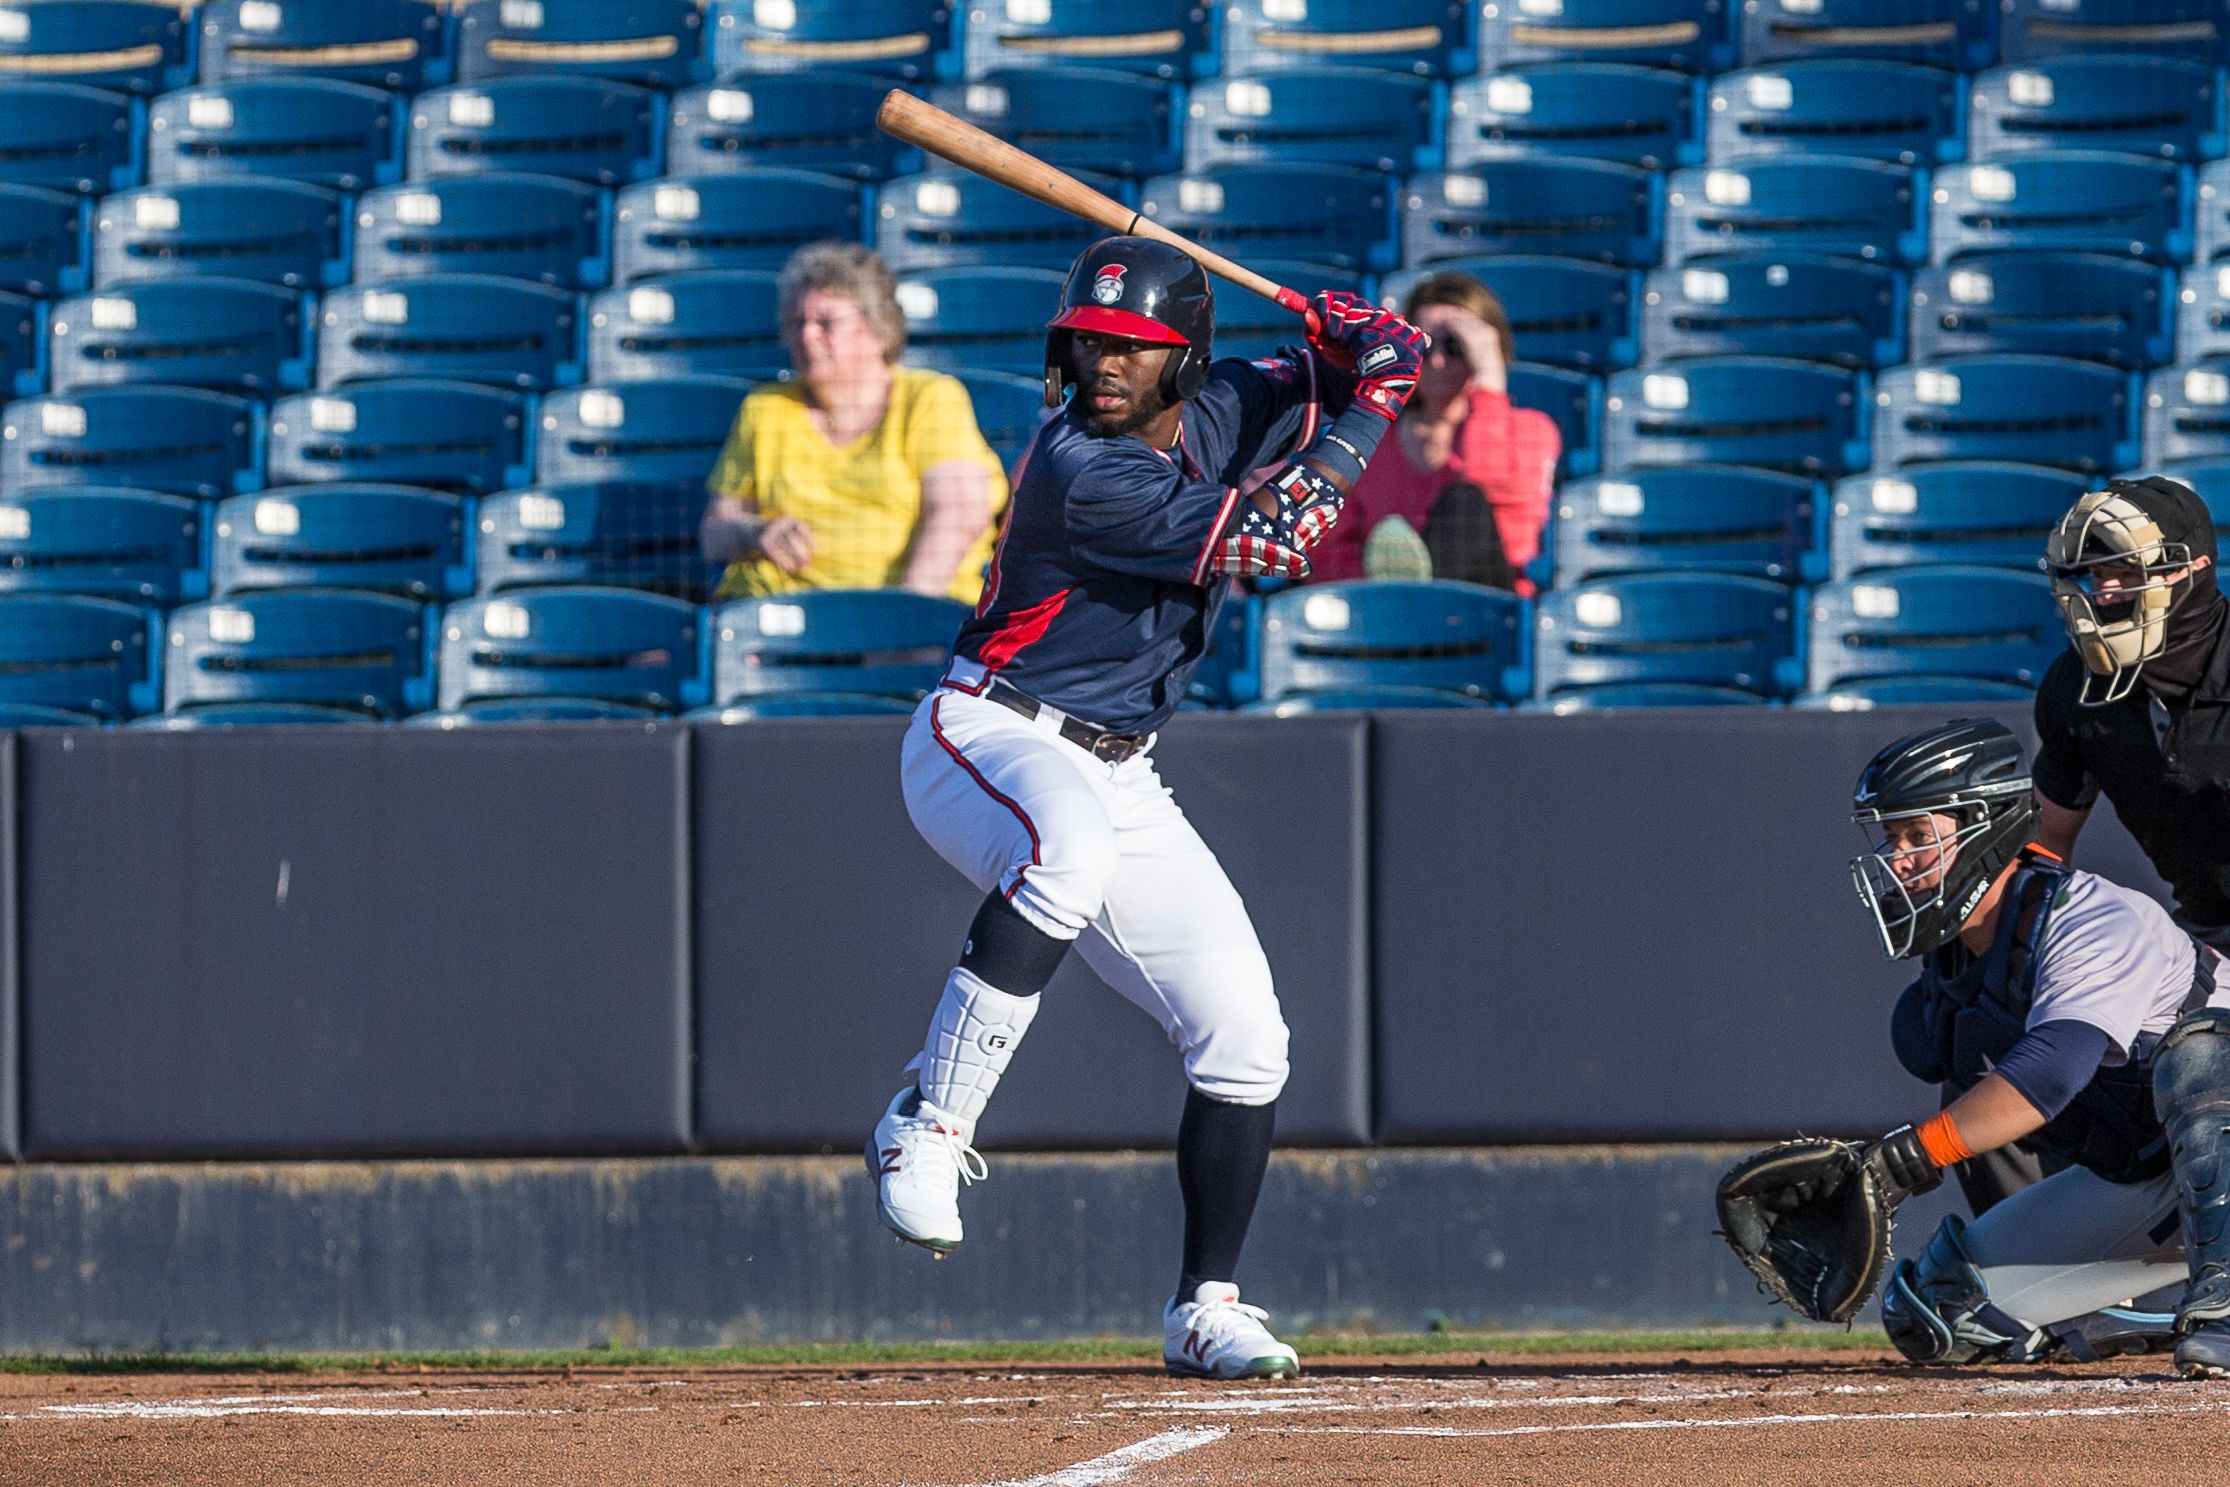 Michael Harris takes a swing for the Rome Braves during a day game. Camera is looking down the third base line at the left handed swinging Harris. Harris’s foot is lifted in anticipation of the pitch and the catcher has his glove out to receive the ball.